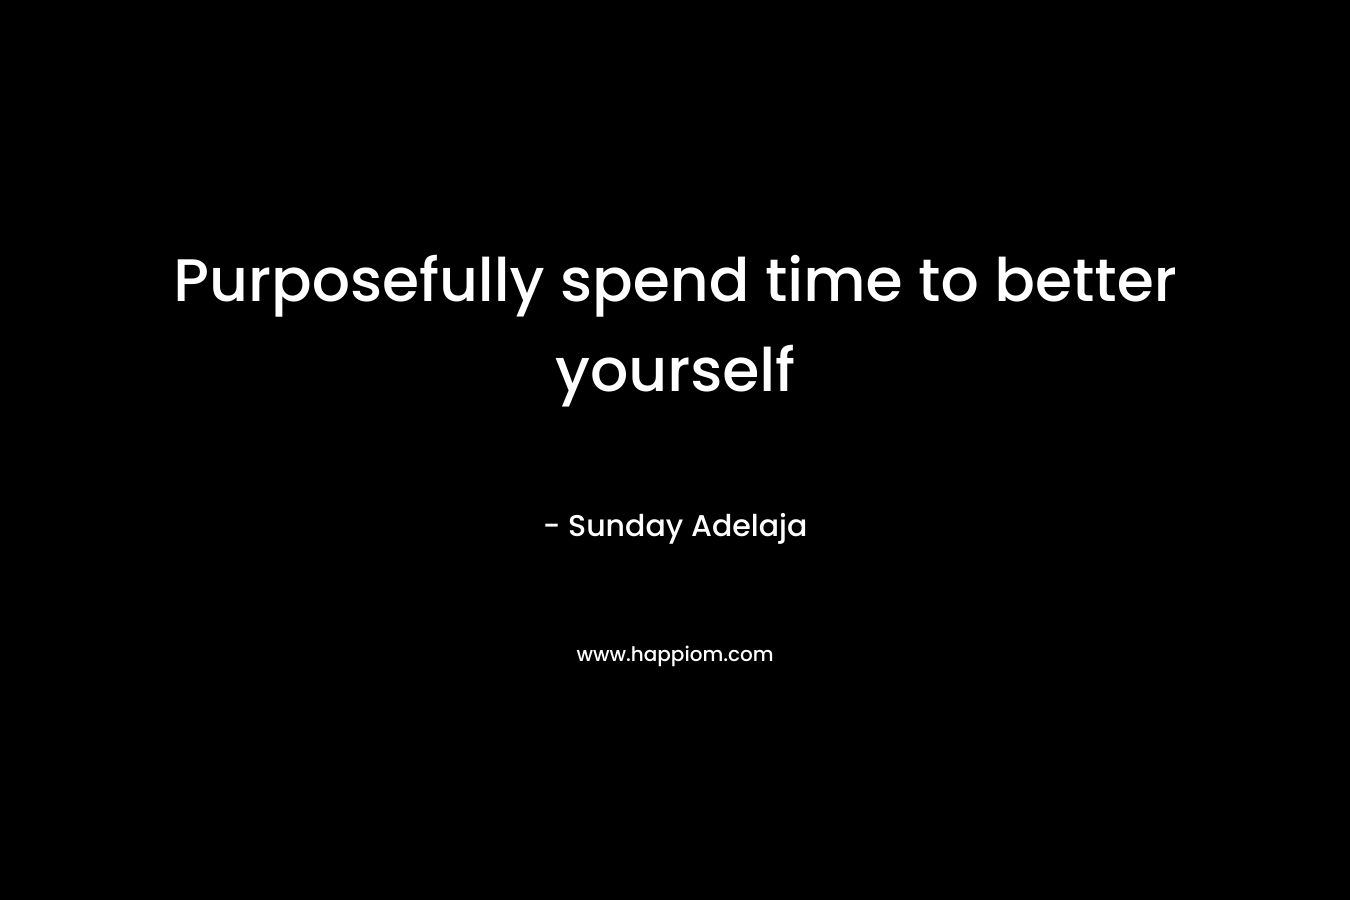 Purposefully spend time to better yourself